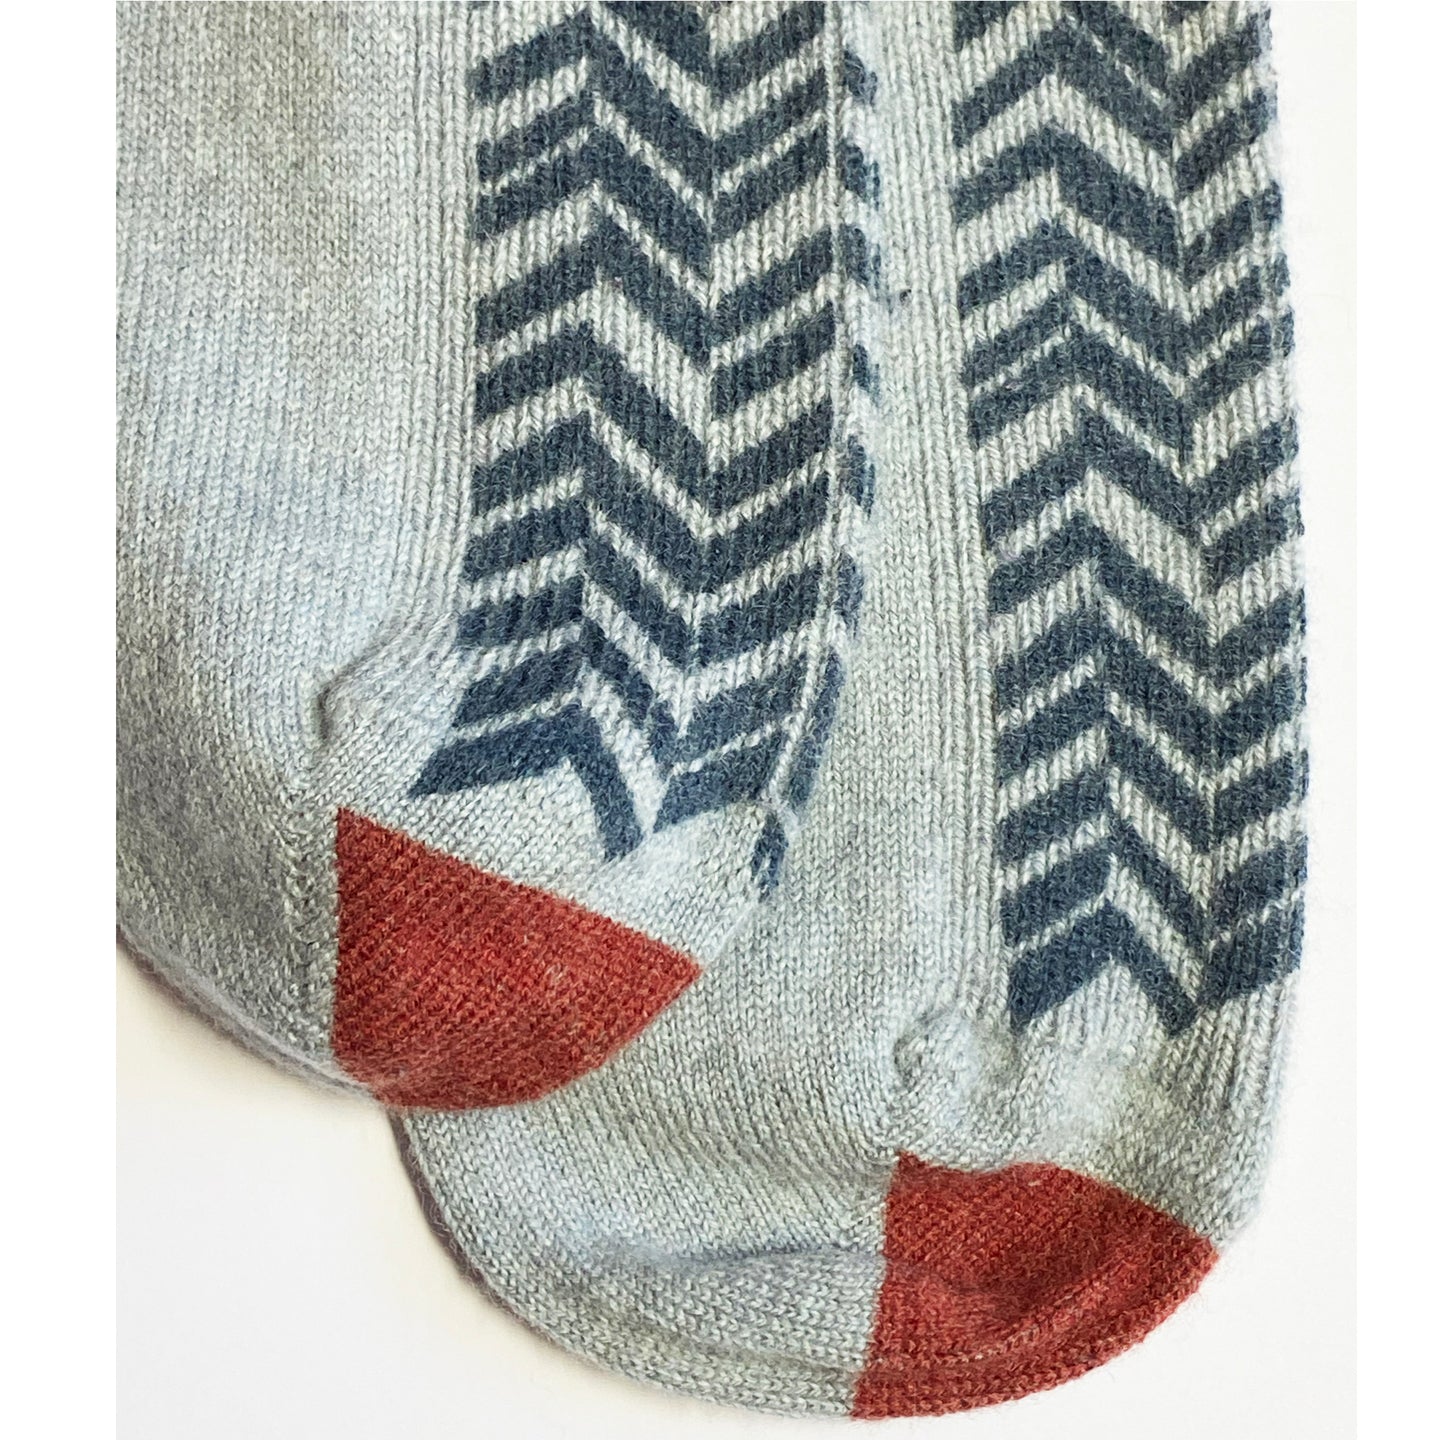 Chevron front and red toe ladies cashmere sock.